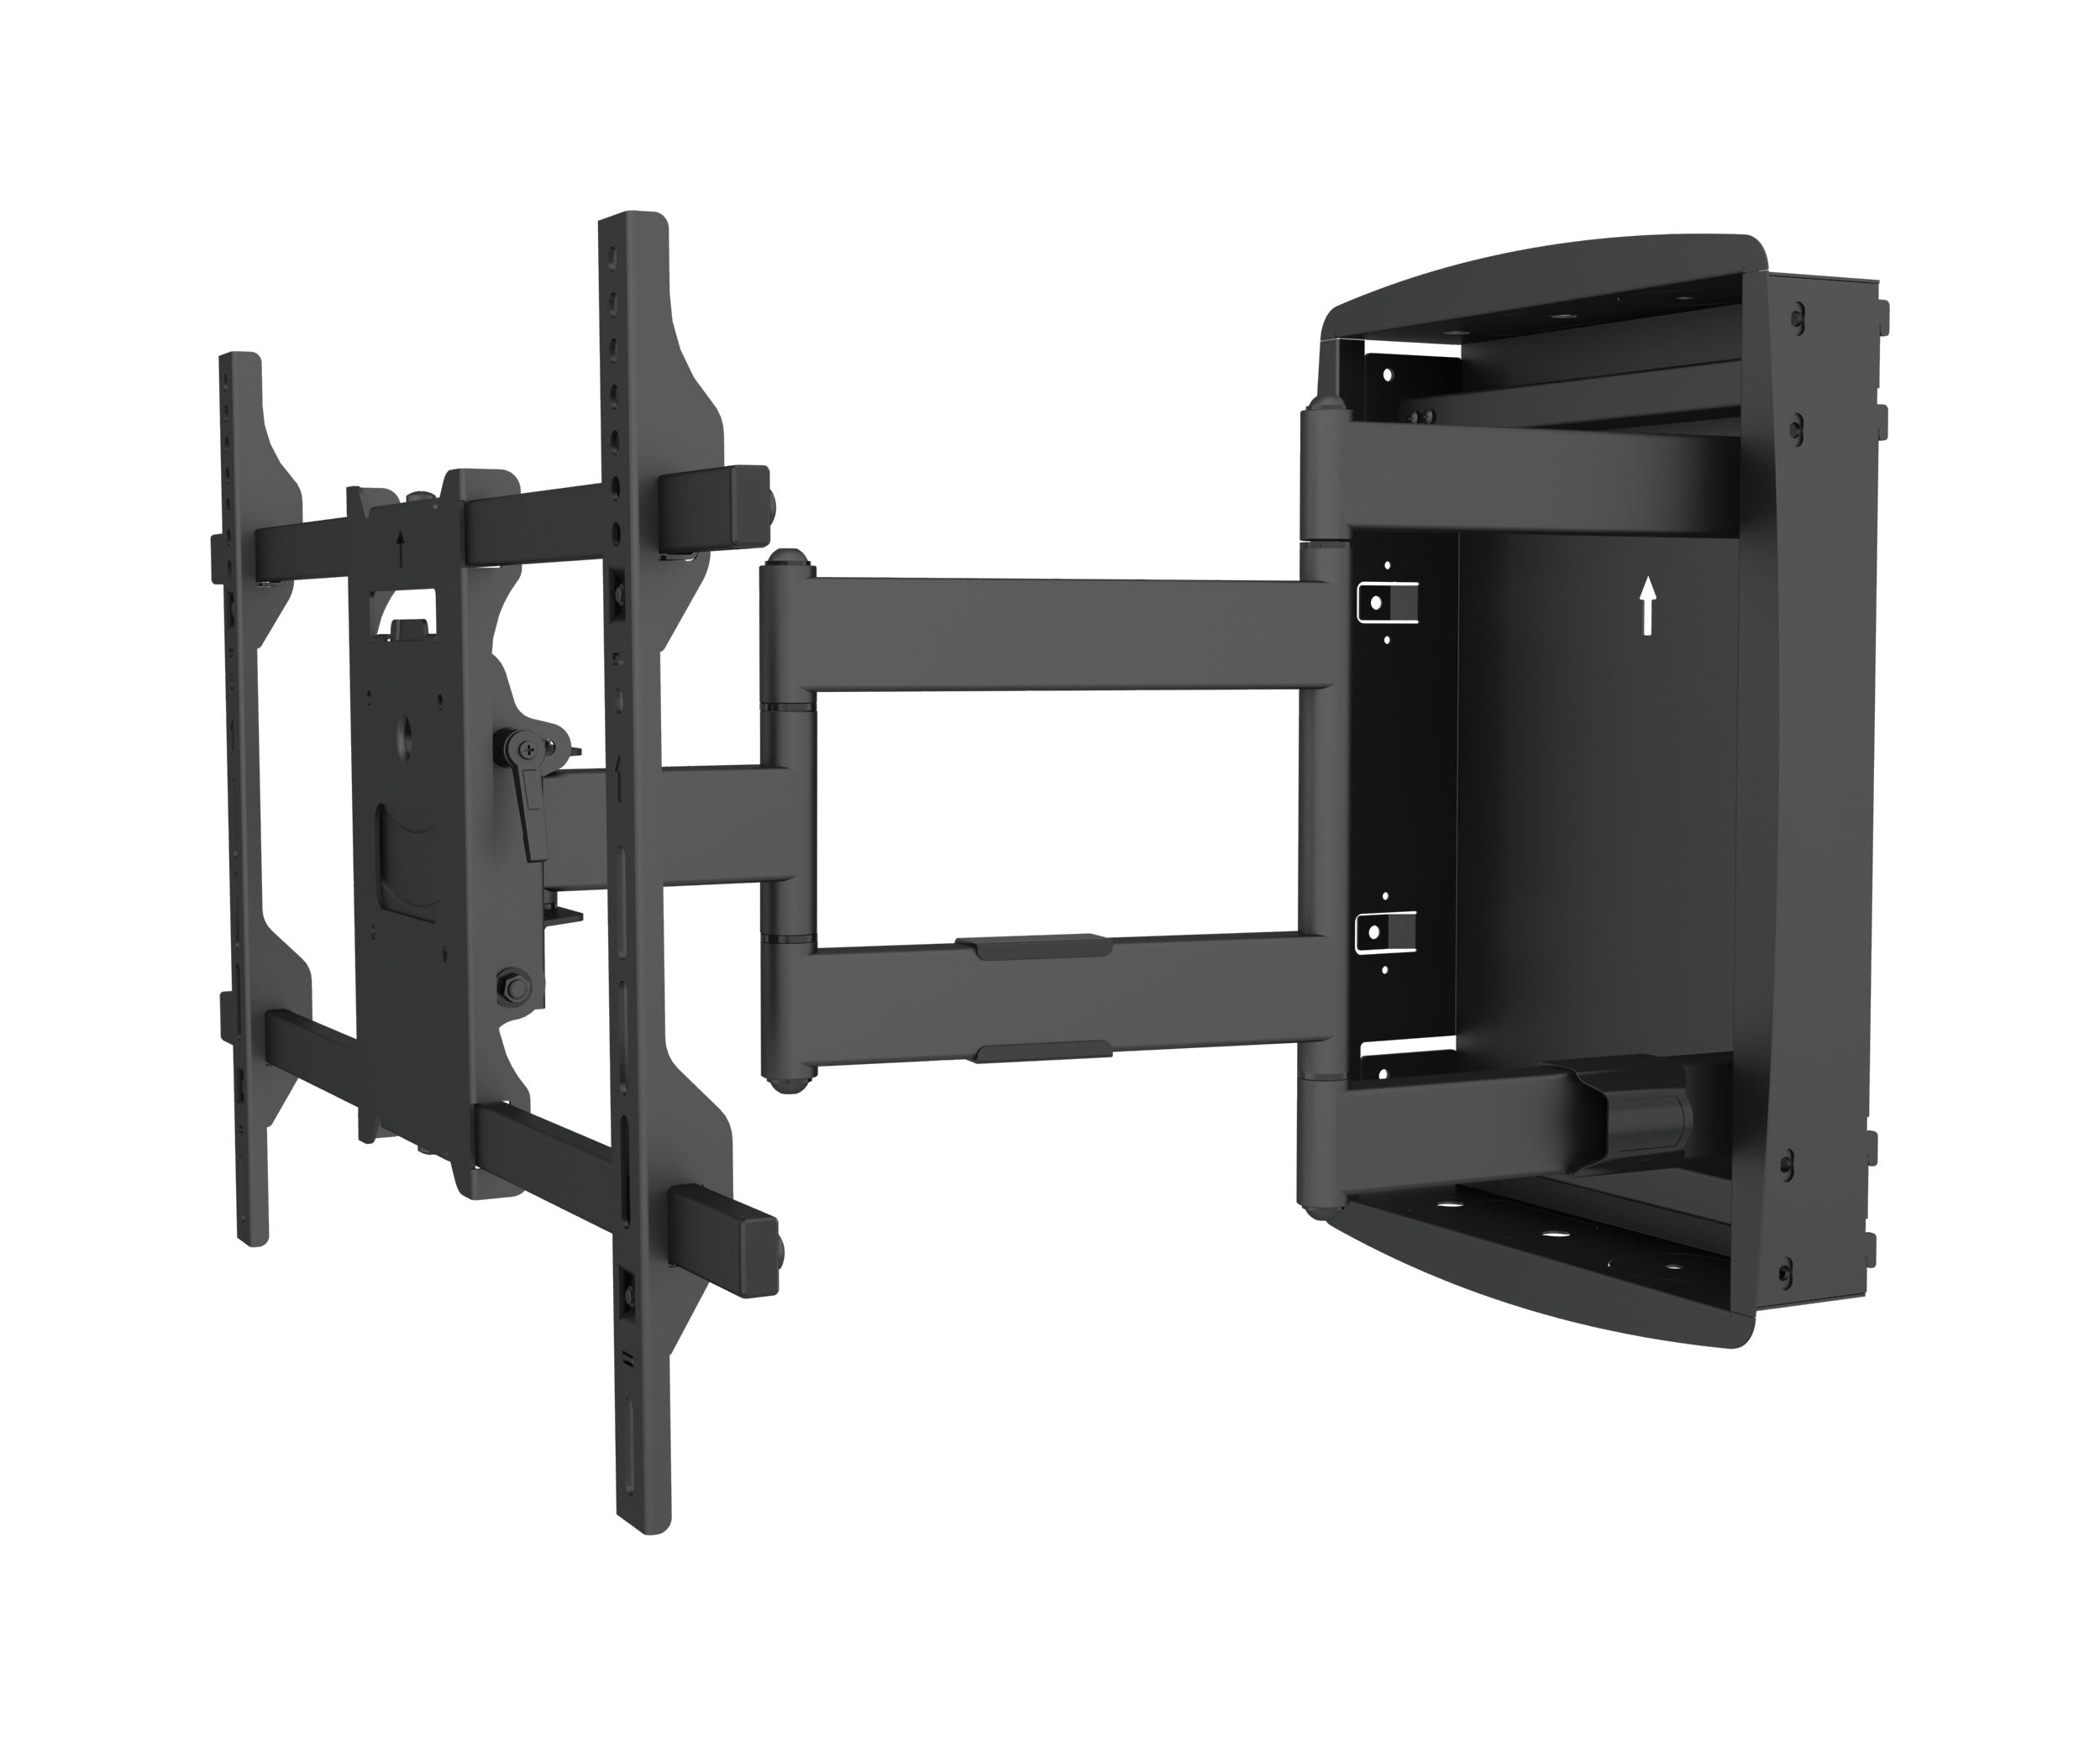 64-1161 Full motion In-Wall Flat LCD LED TV / Panels Wood Stud Mount Bracket for 32-70 inches Screens